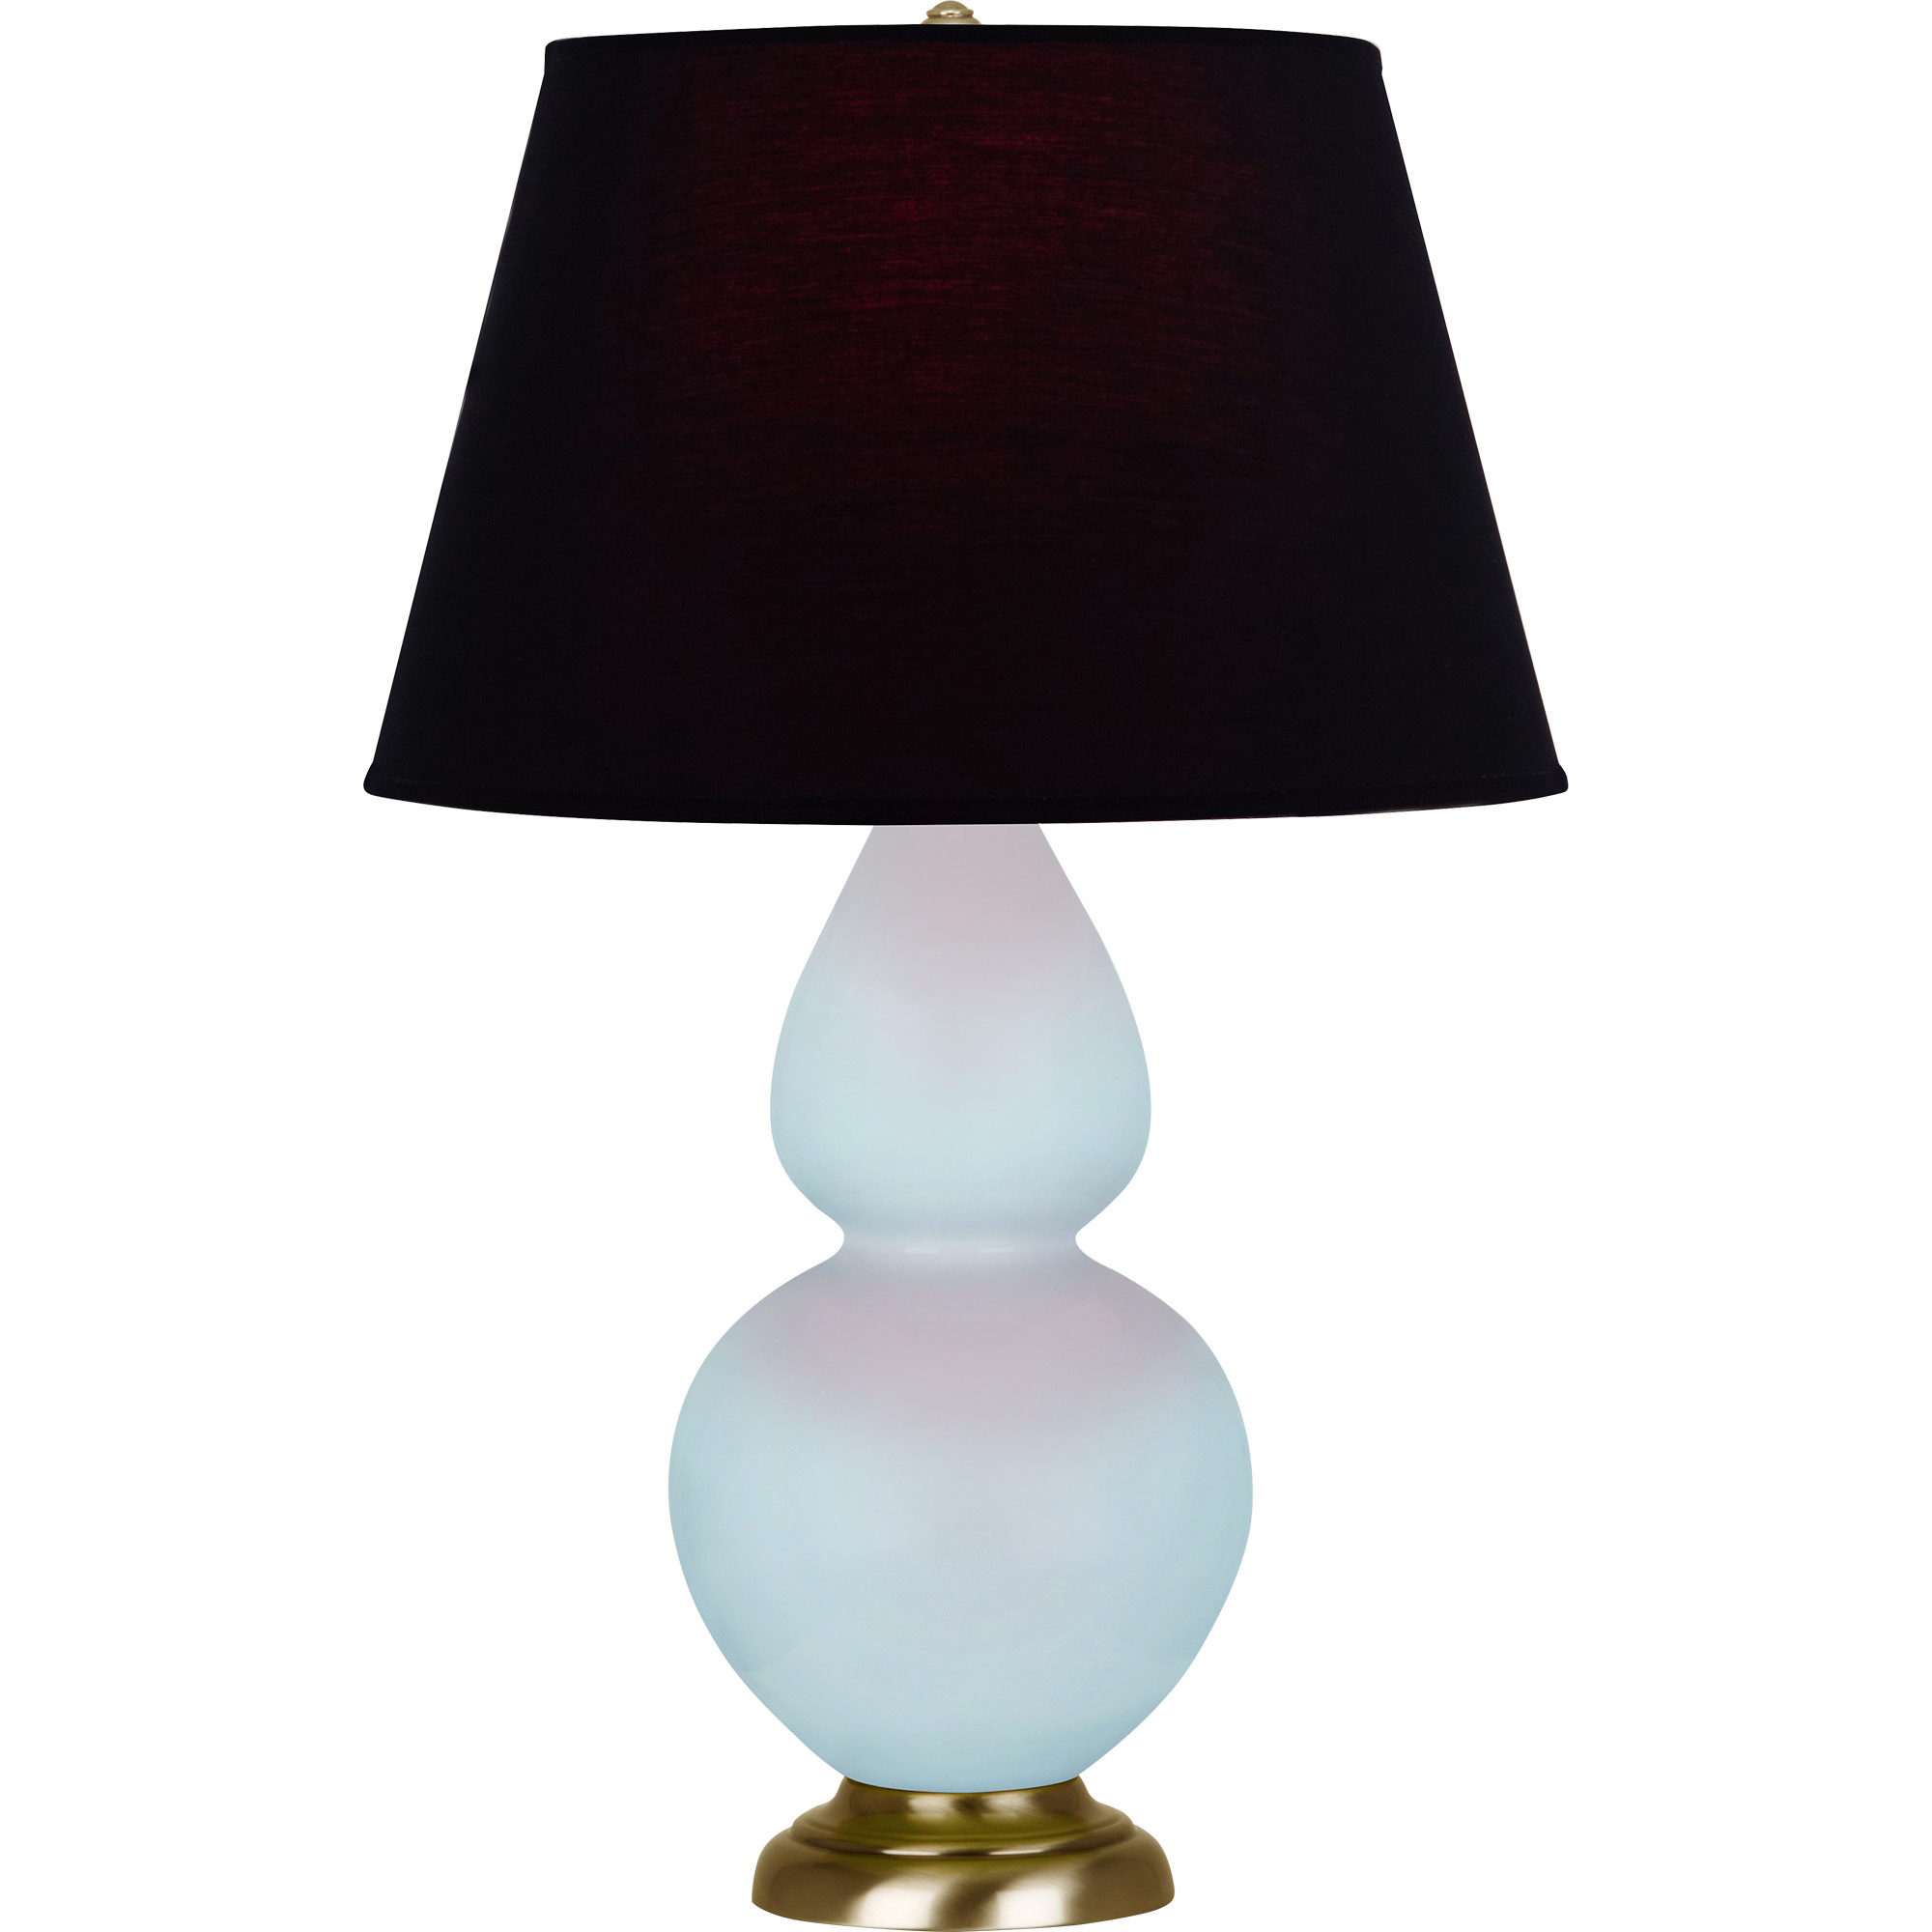 Double Gourd Table Lamp Style #1666K